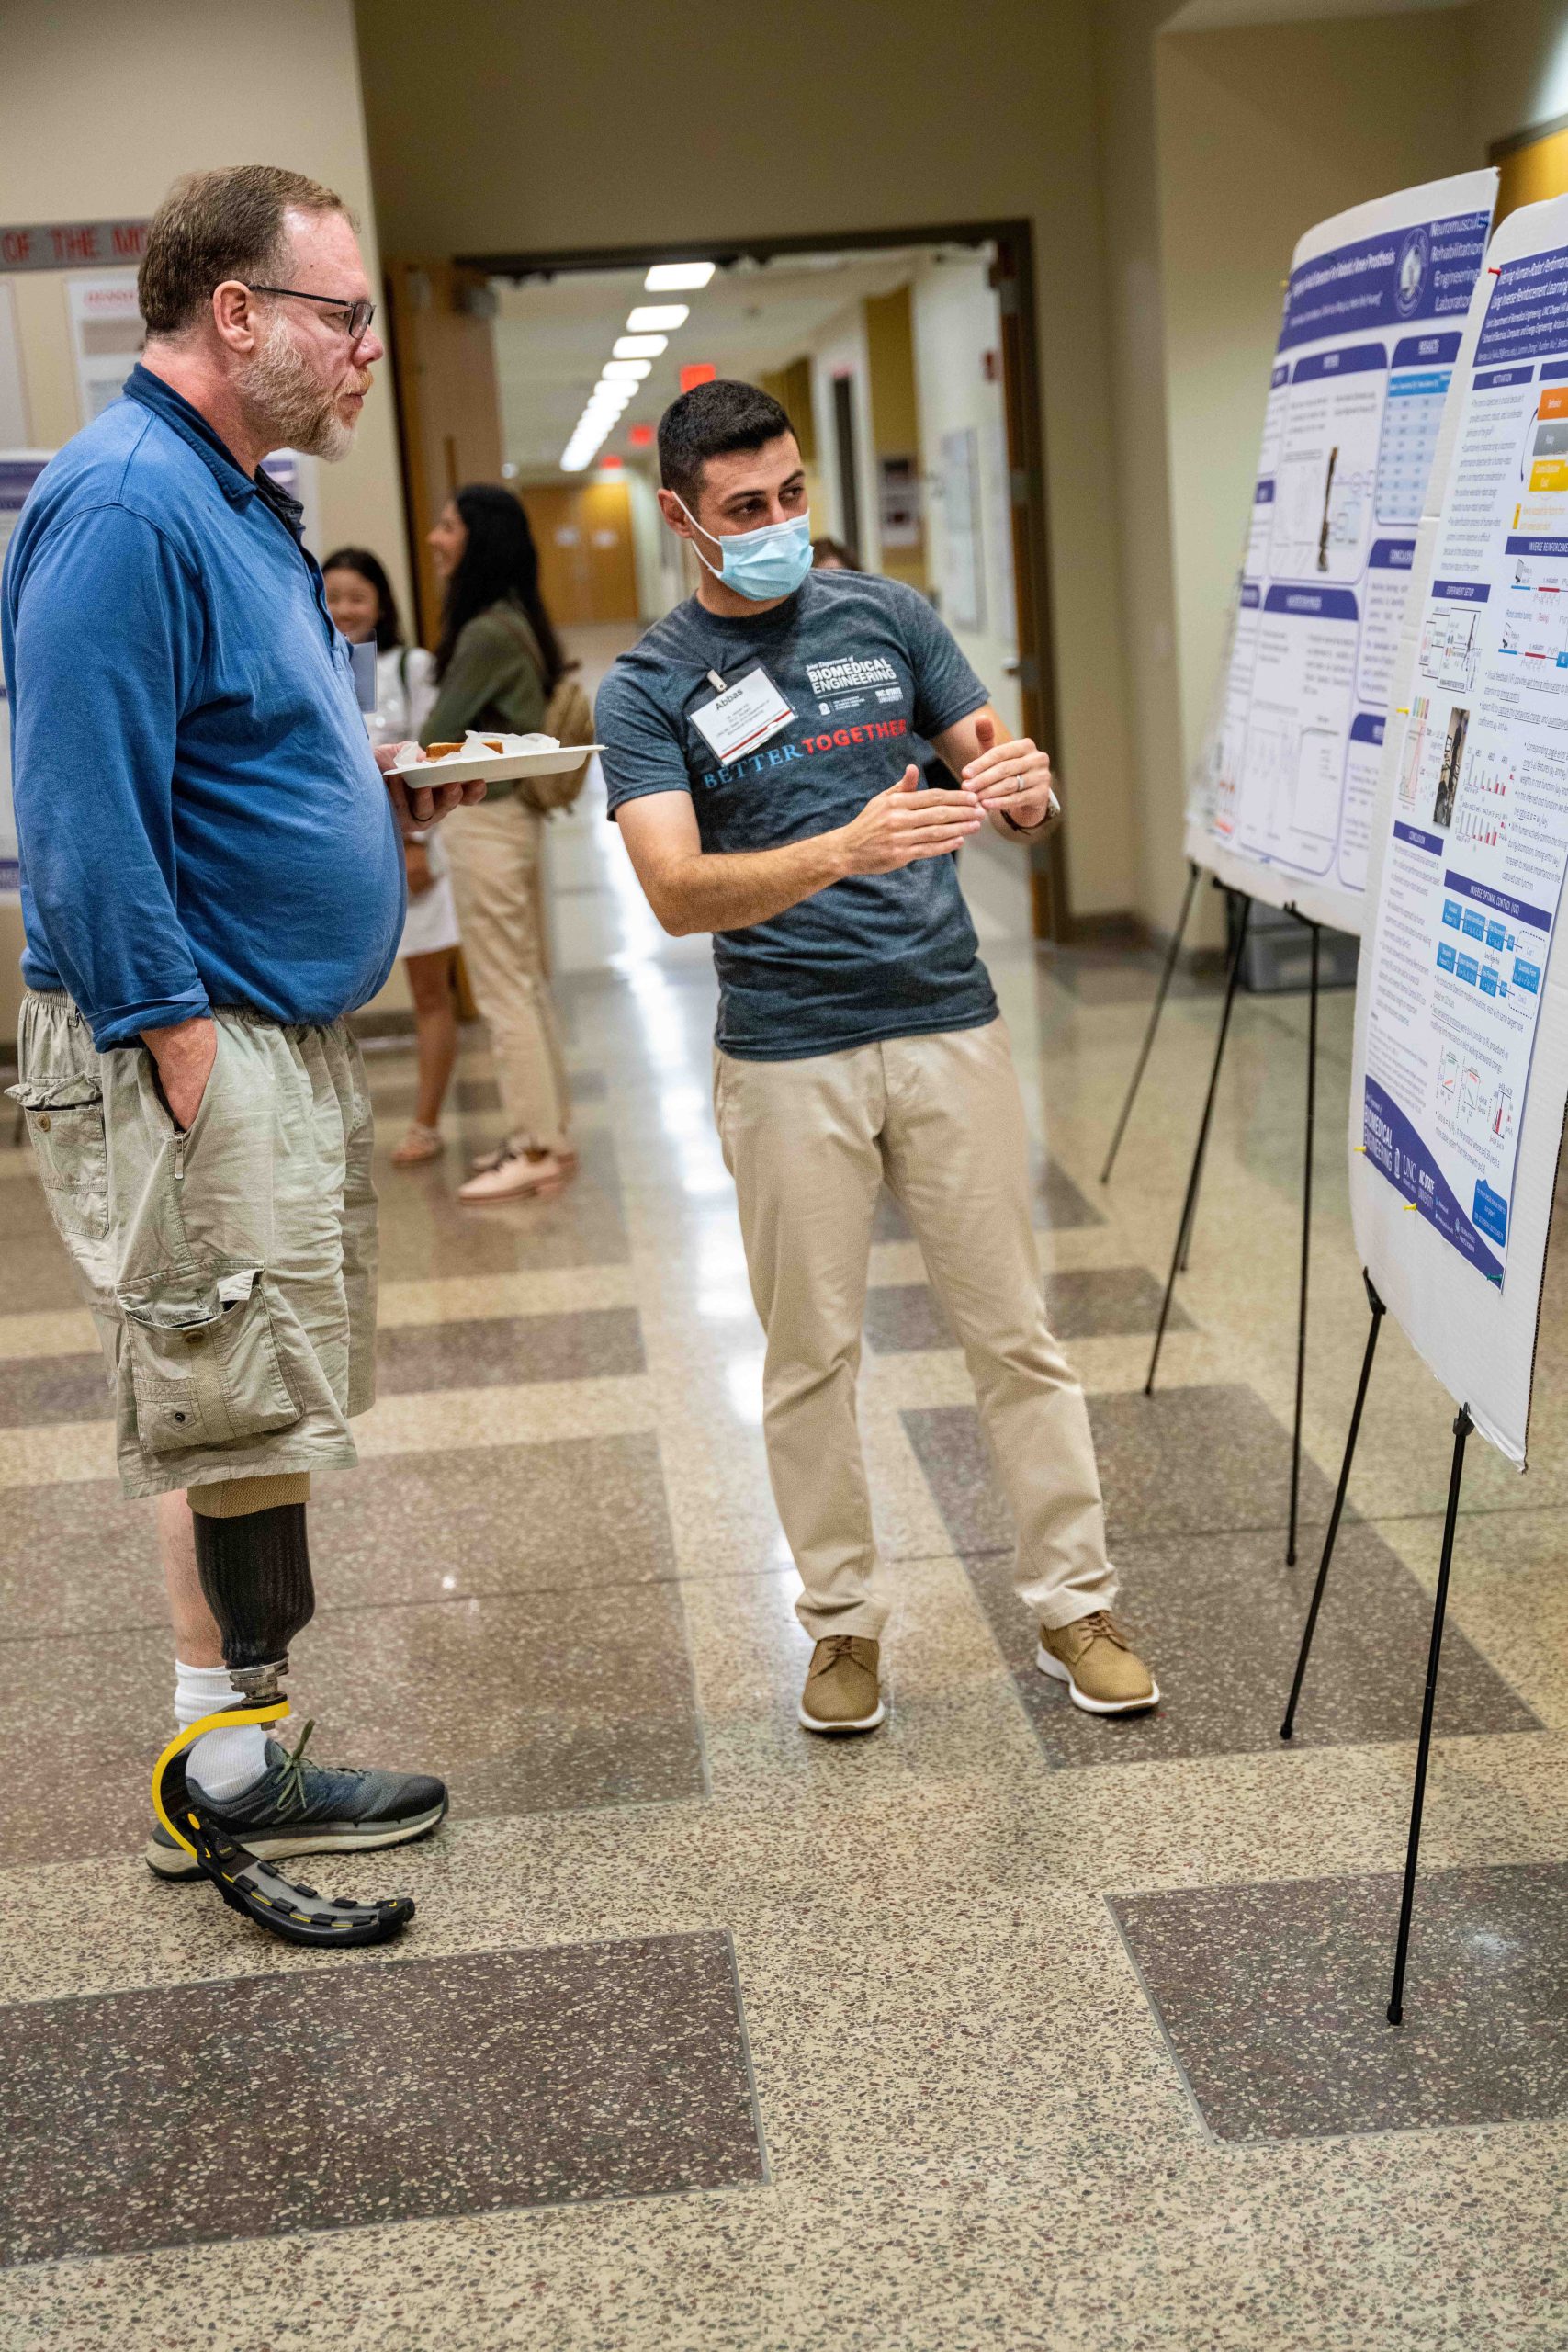 Student shows volunteer research presentation